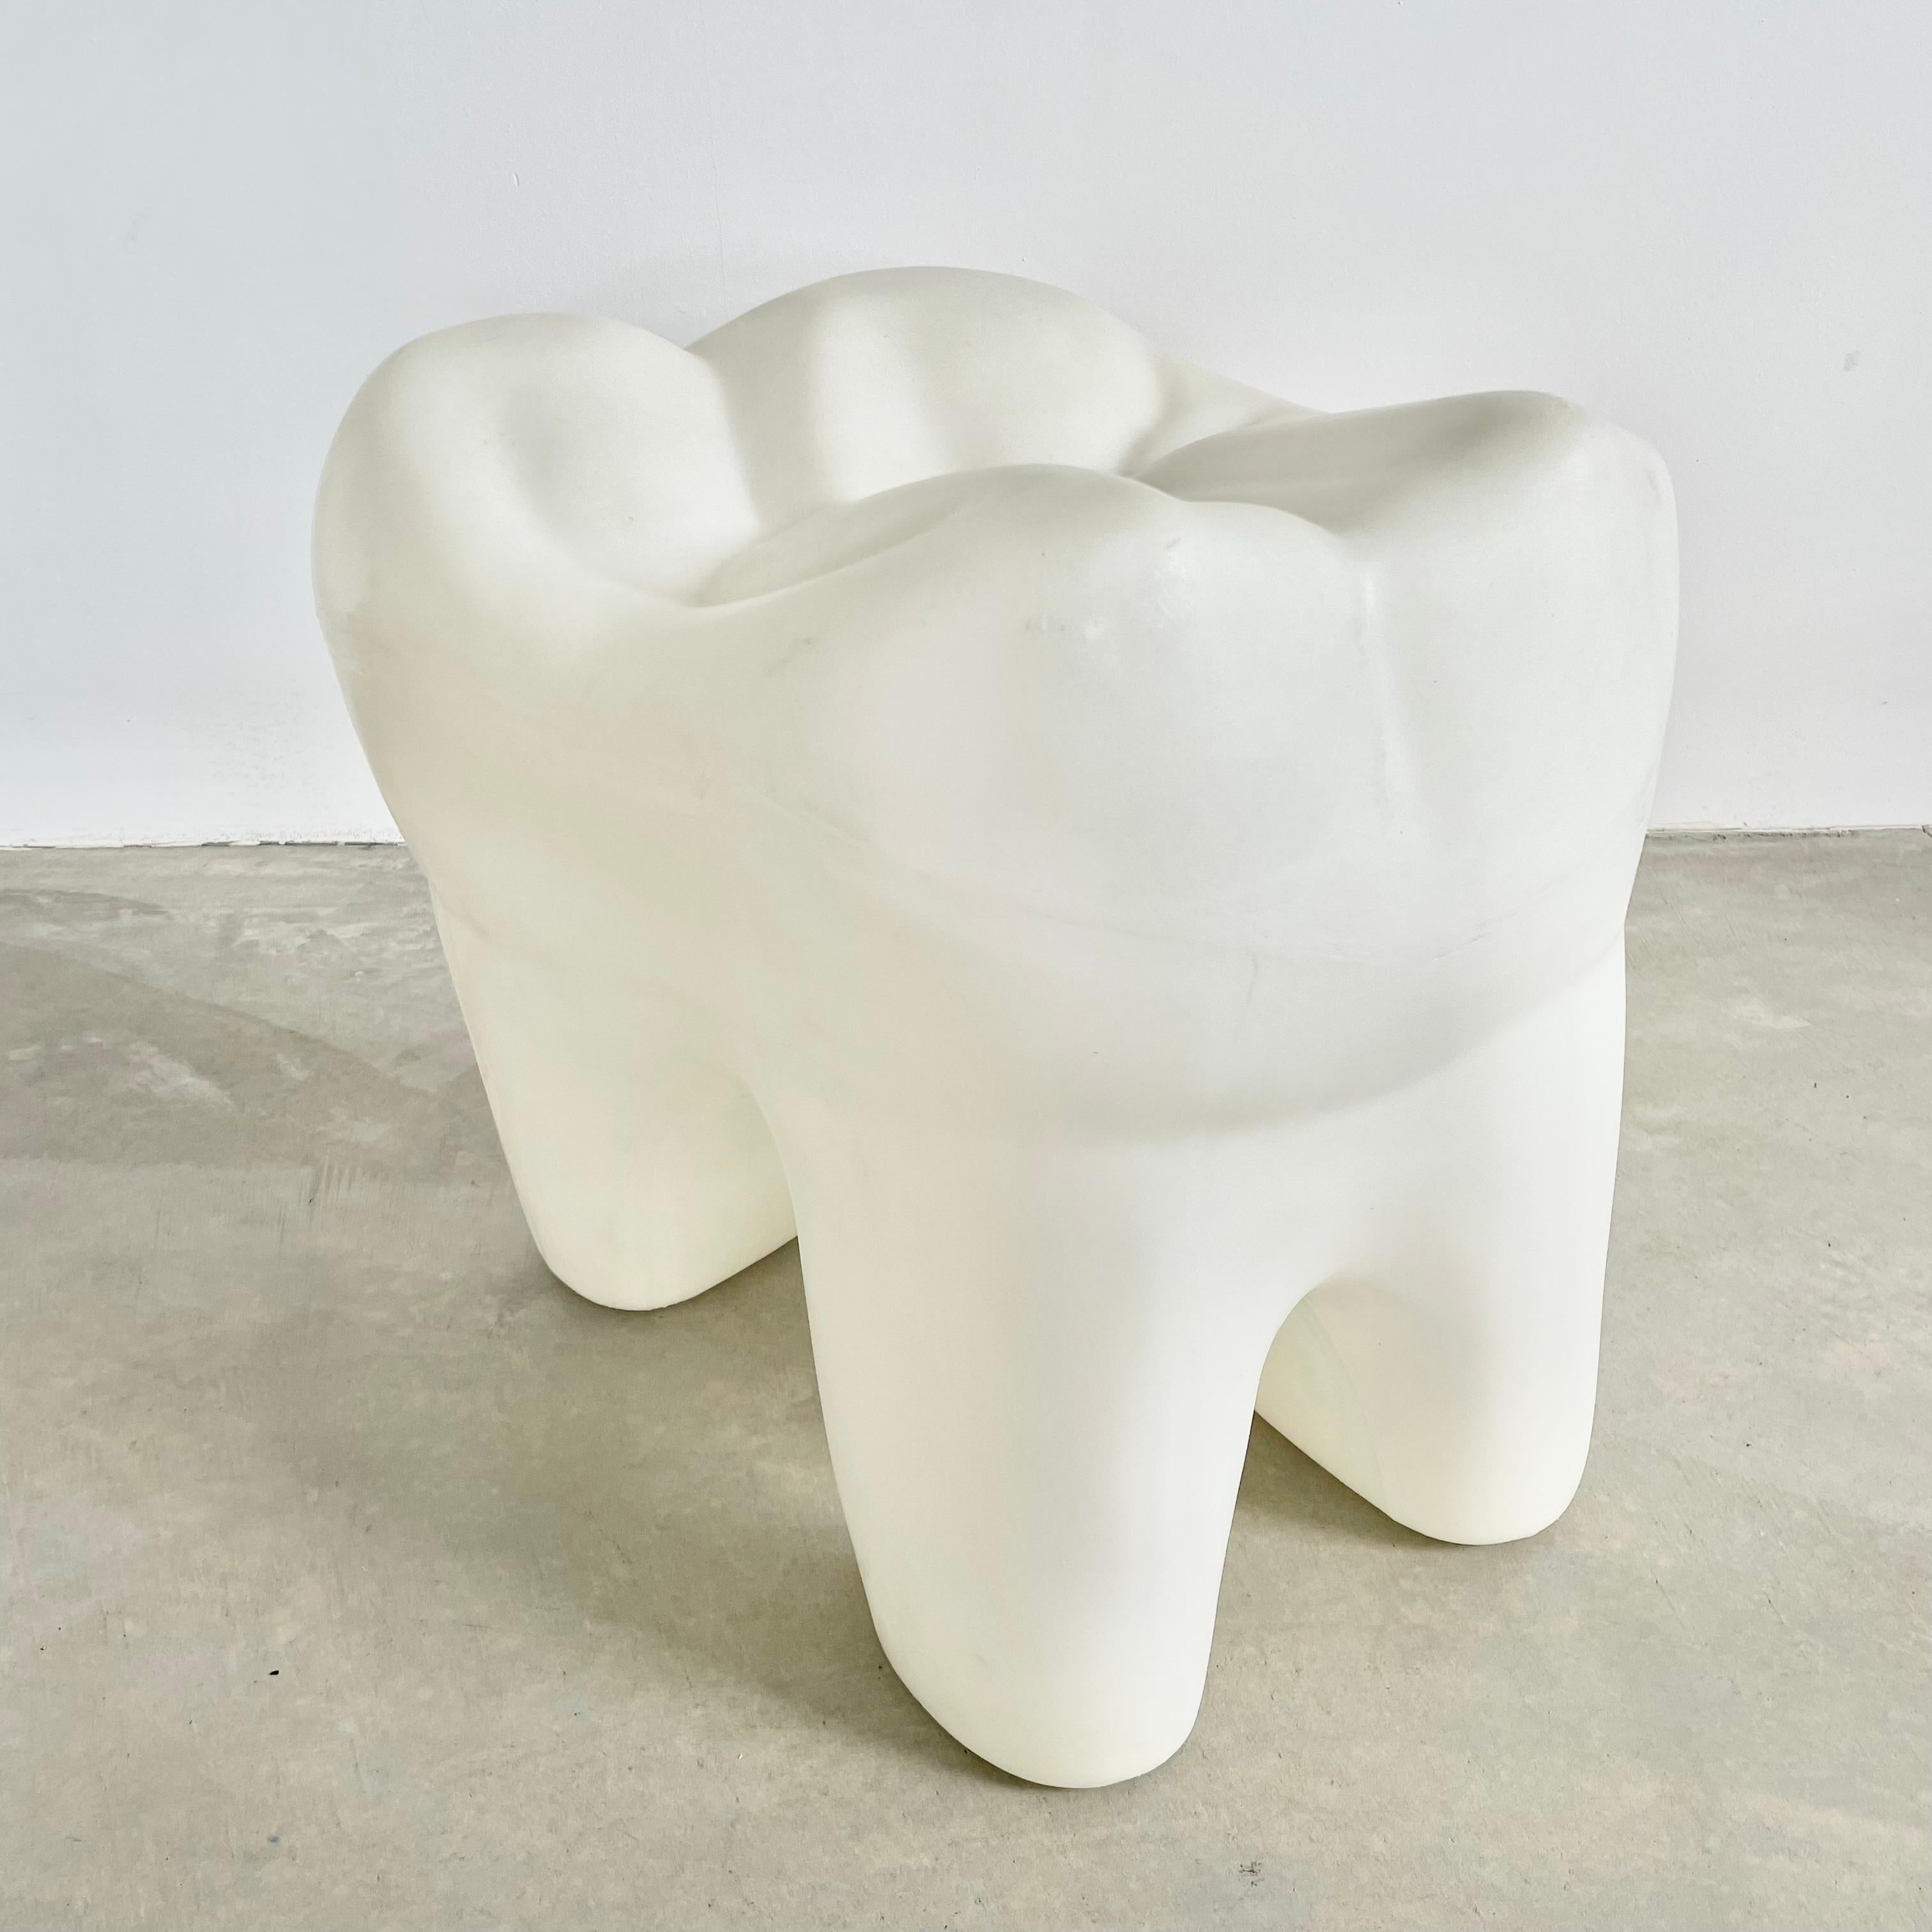 Incredible 3 legged molar stool made in Garden Grove, California. Substantial and tough plastic body held up by three sturdy legs made to resemble a tooth's roots. The seat of the stool has great tooth details as well including the pits and fissures